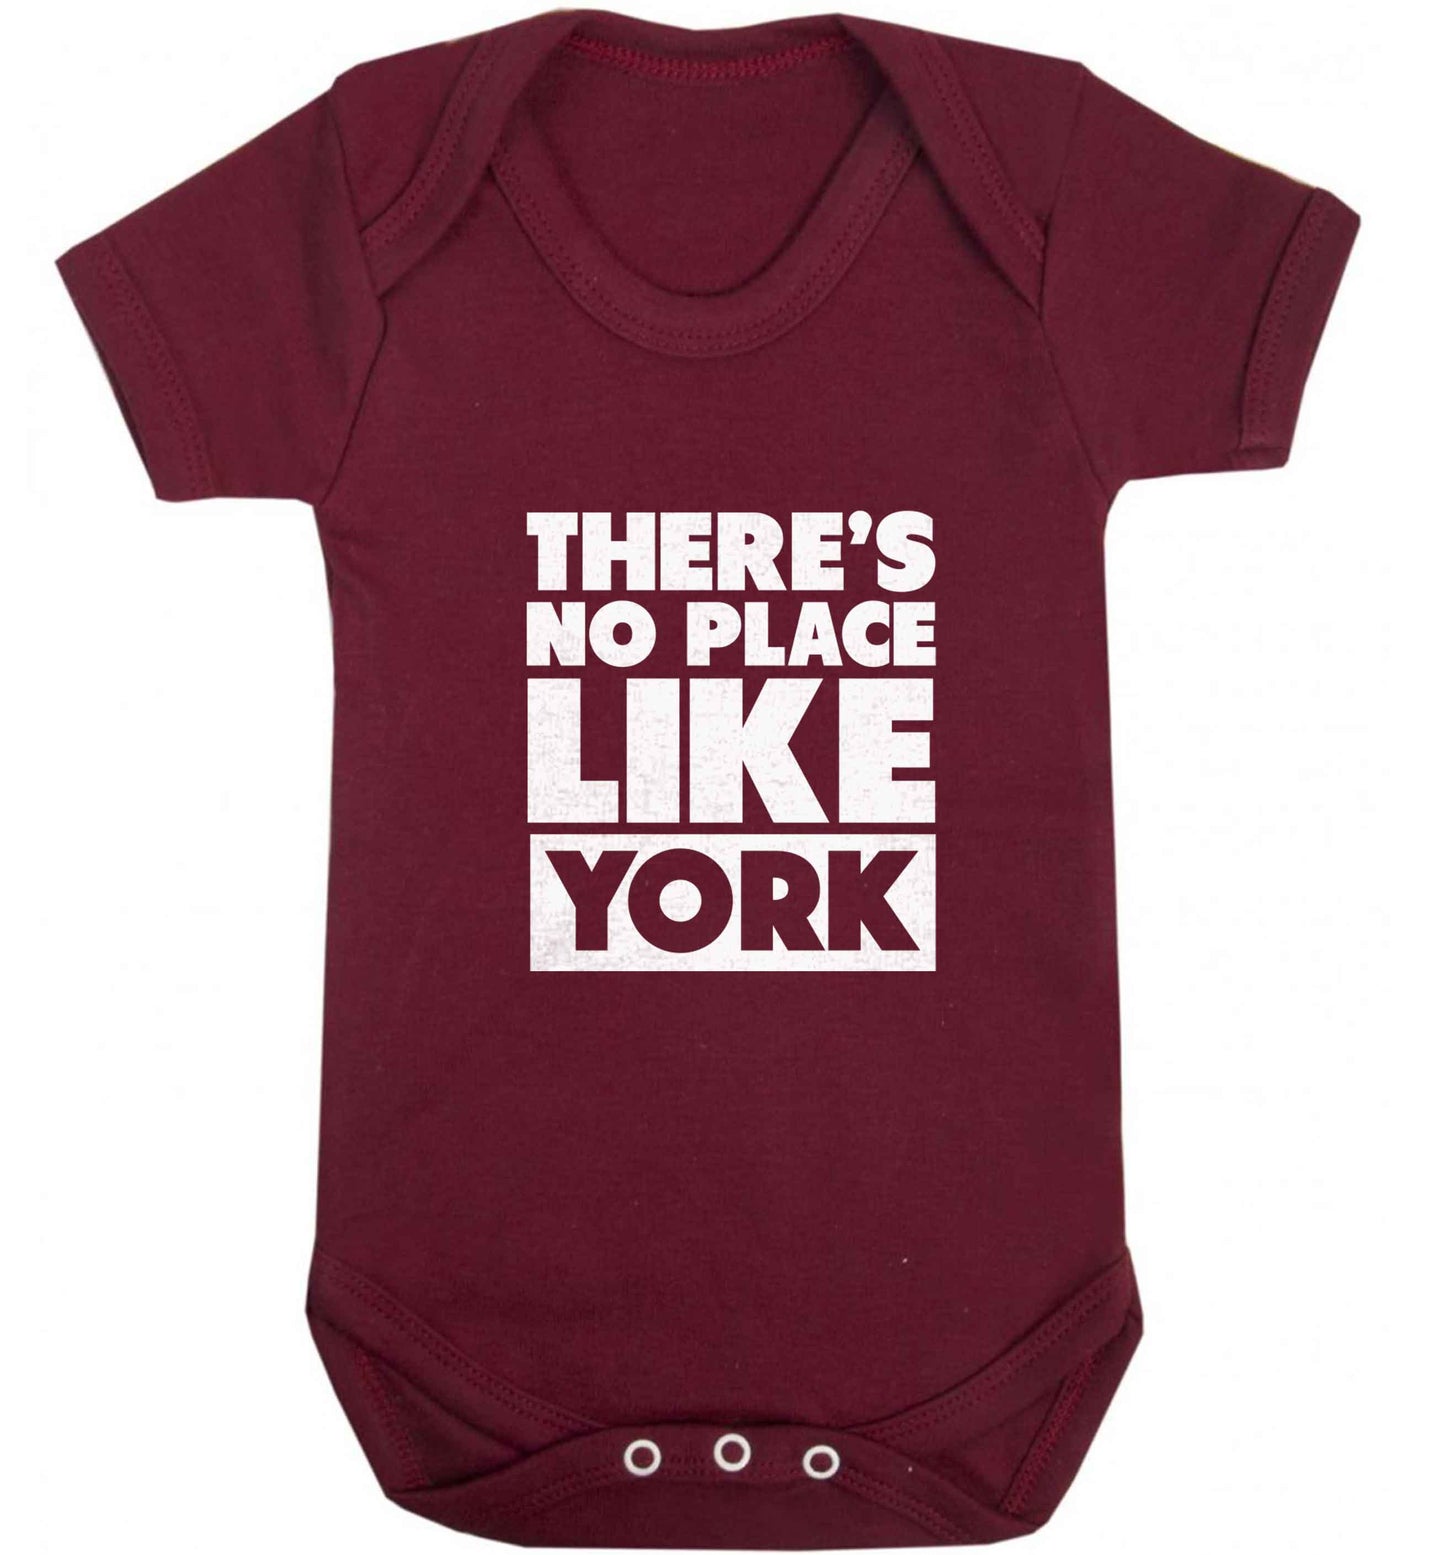 There's no place like york baby vest maroon 18-24 months